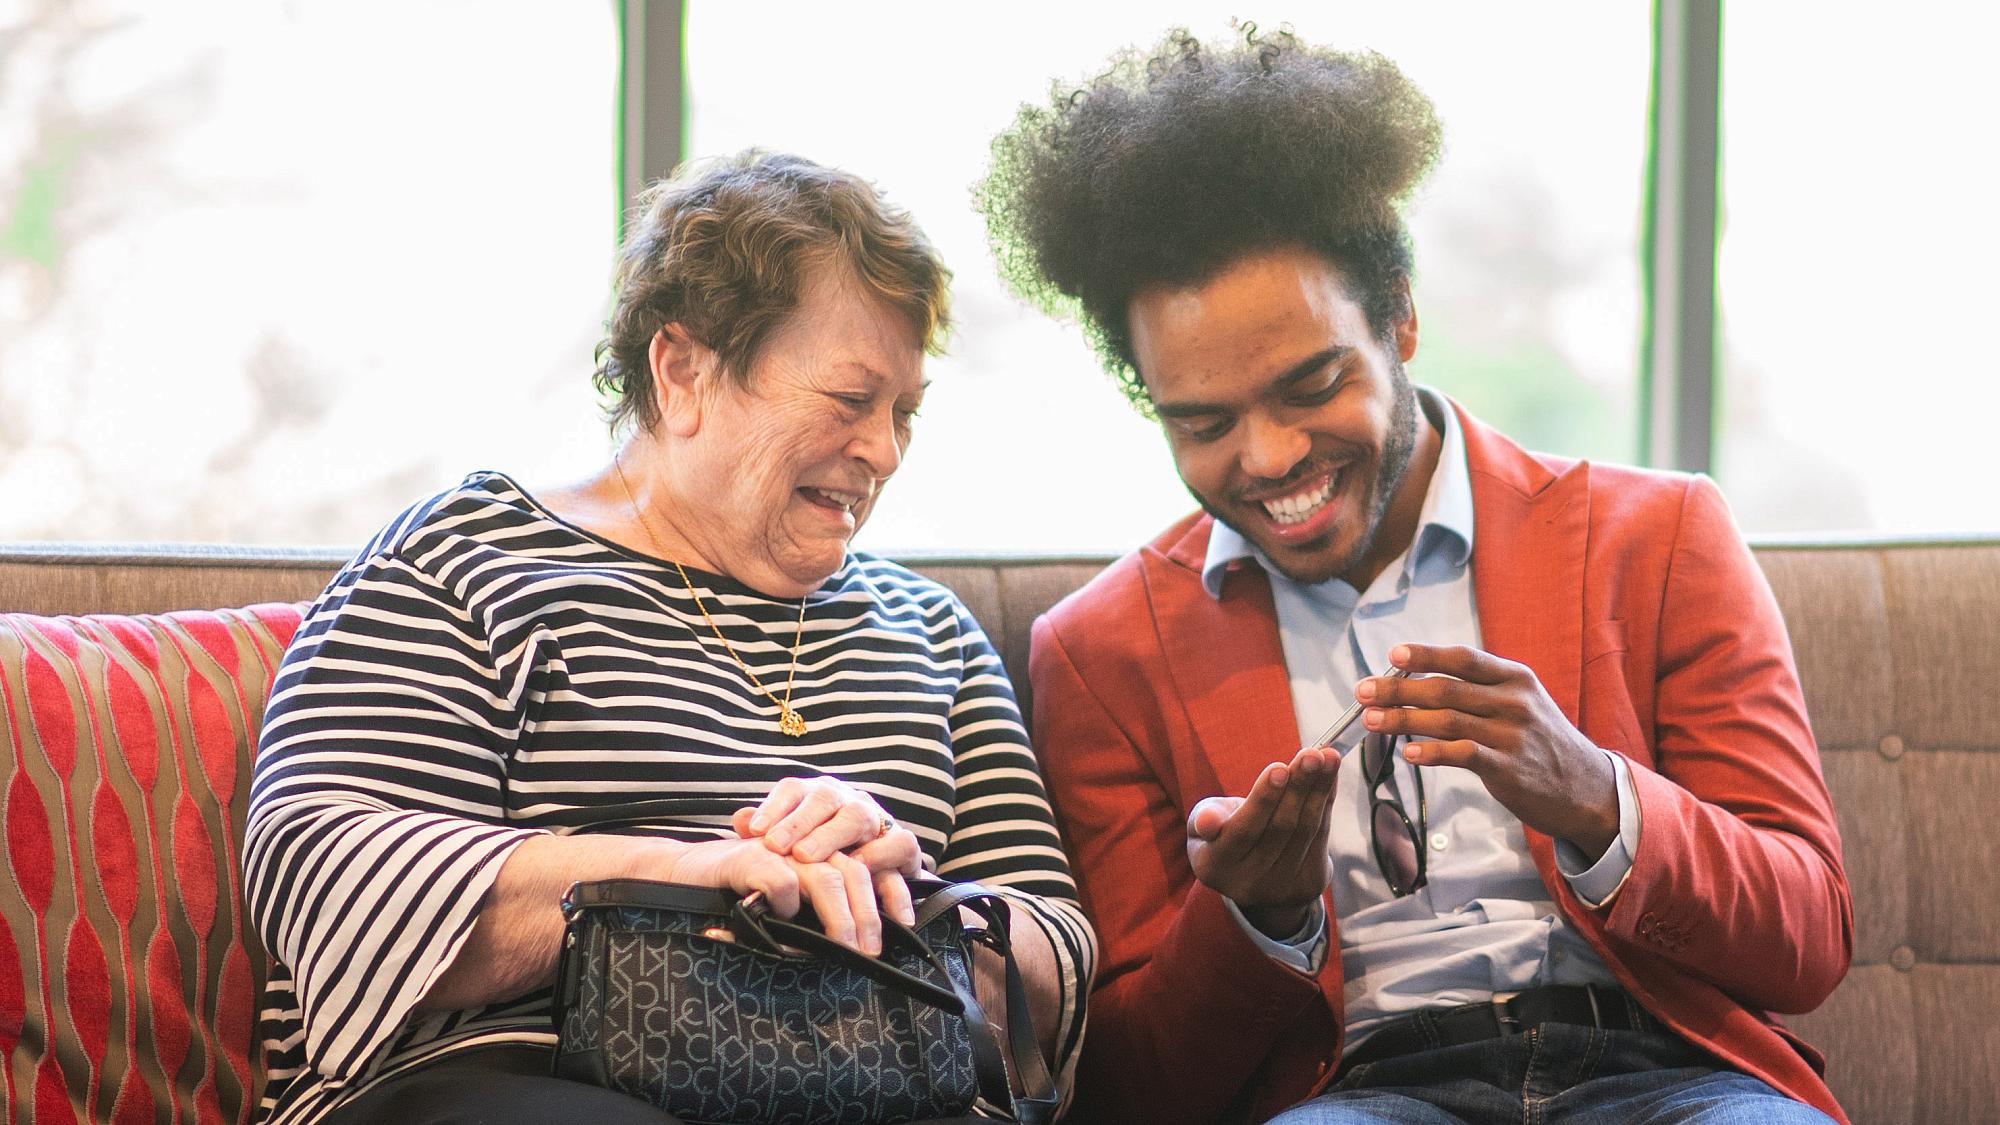 Older adult woman sitting on couch with young man both smiling looking at something on his phone